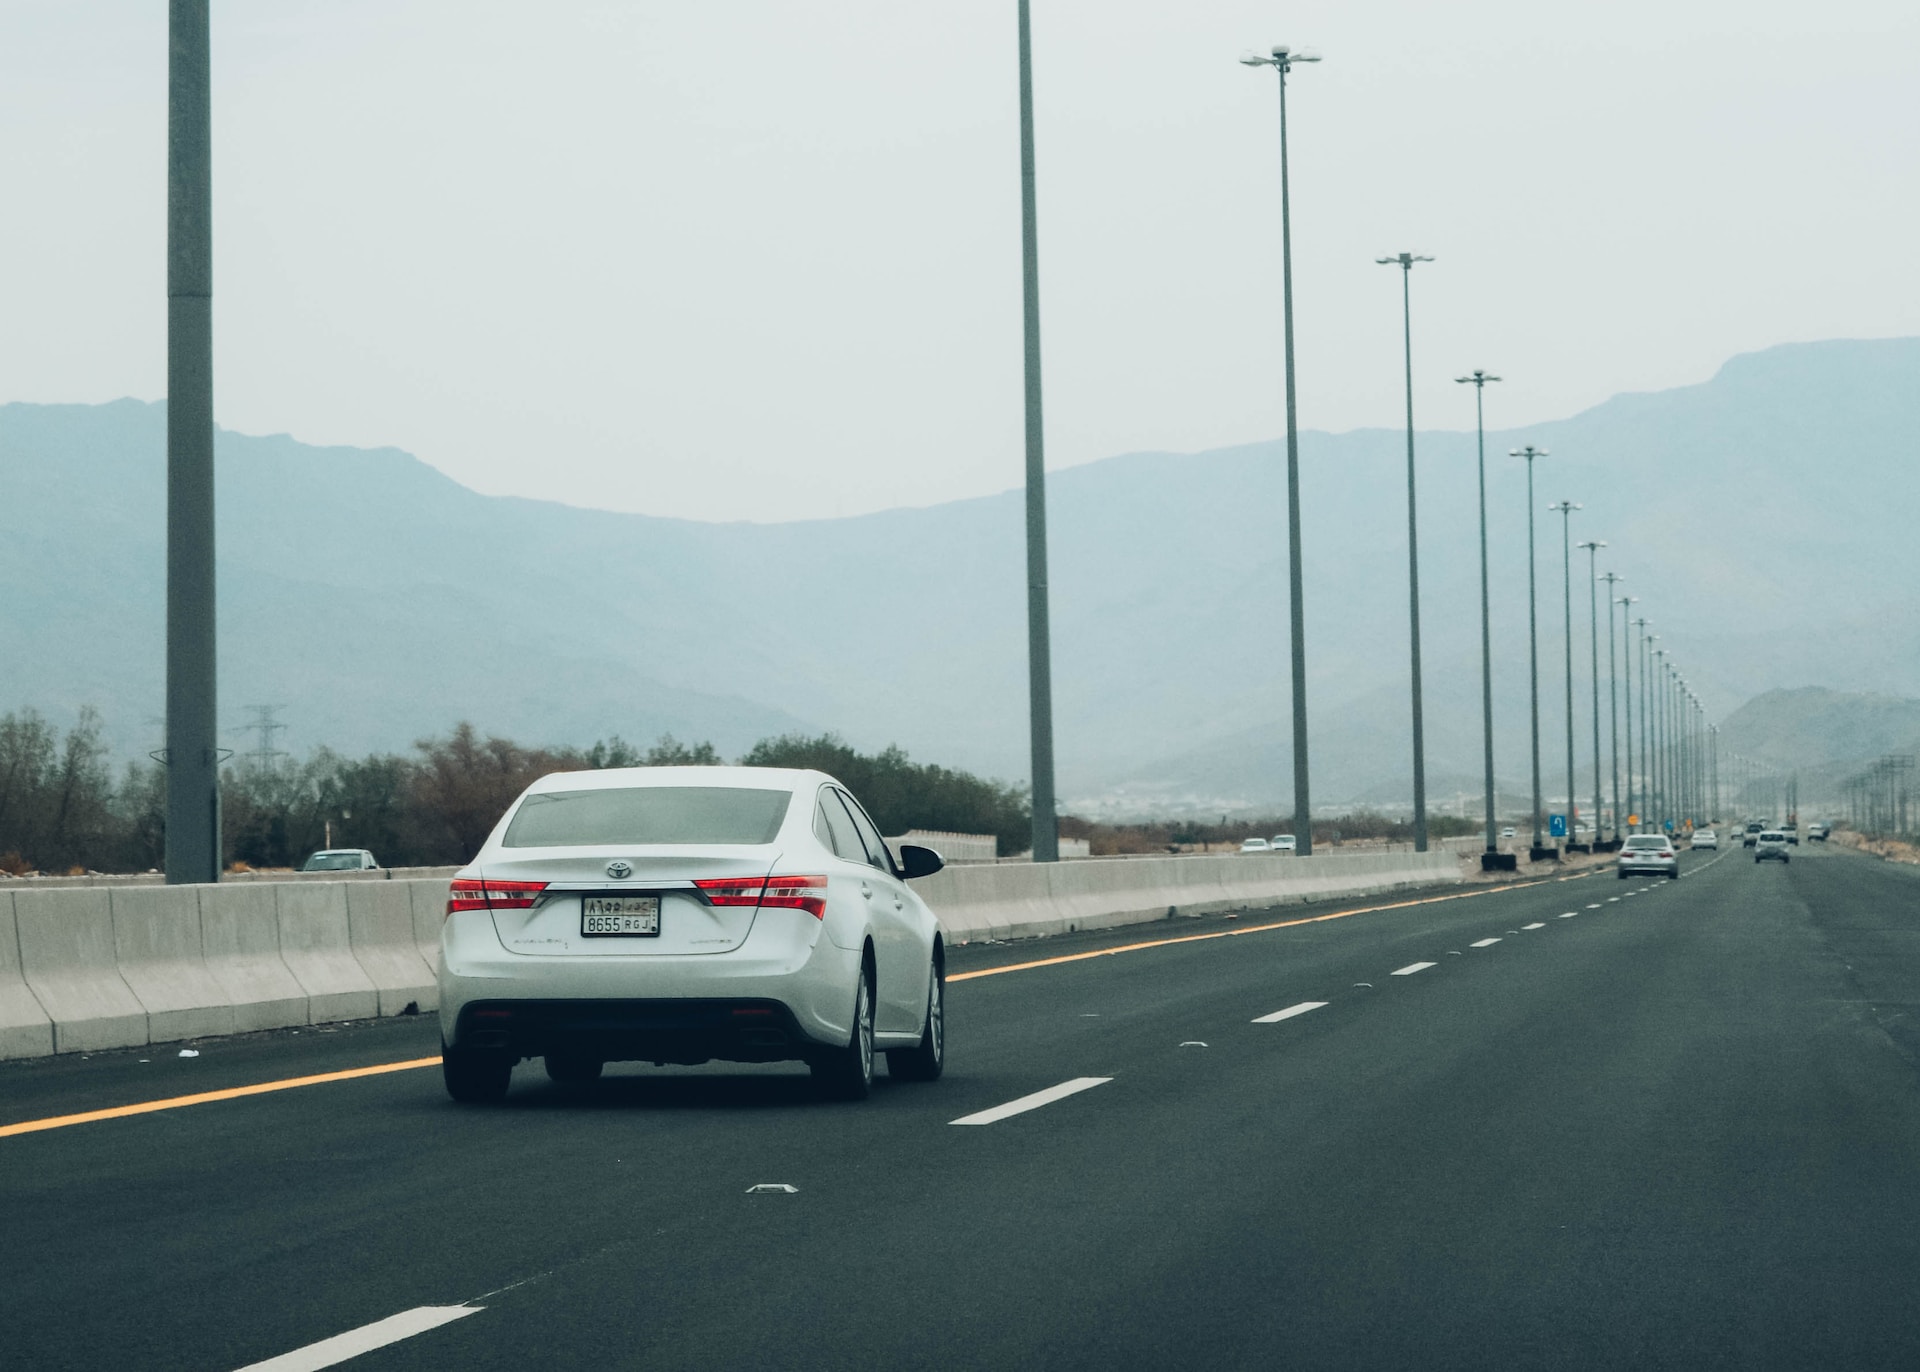 Lumi plans to open a showroom in Jeddah. Pictured is a car on the road in Saudi Arabia. 